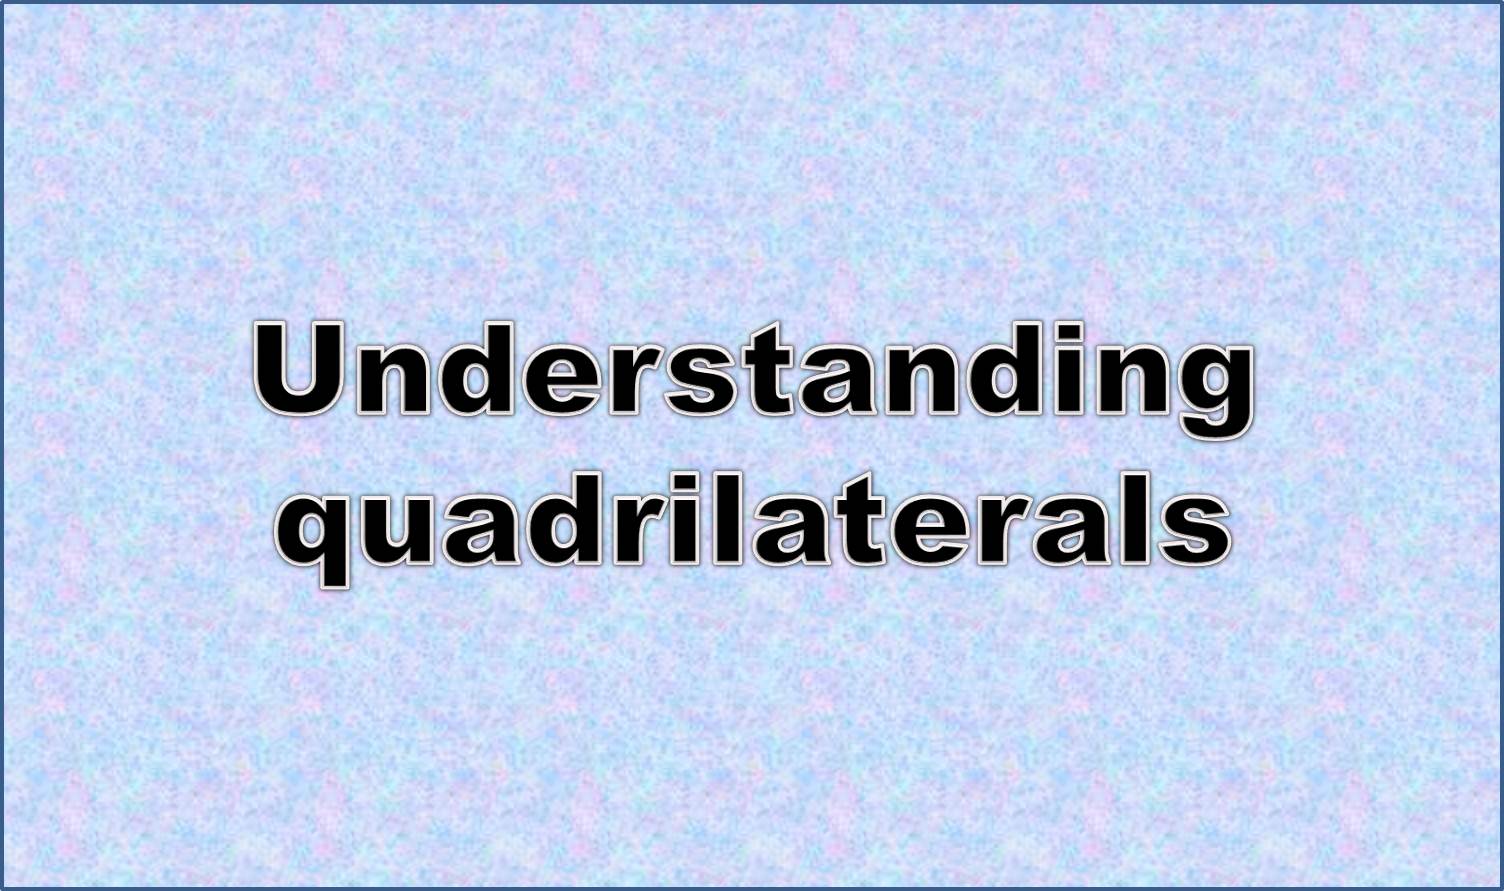 http://study.aisectonline.com/images/Whether a special quadrilateral can exist.jpg